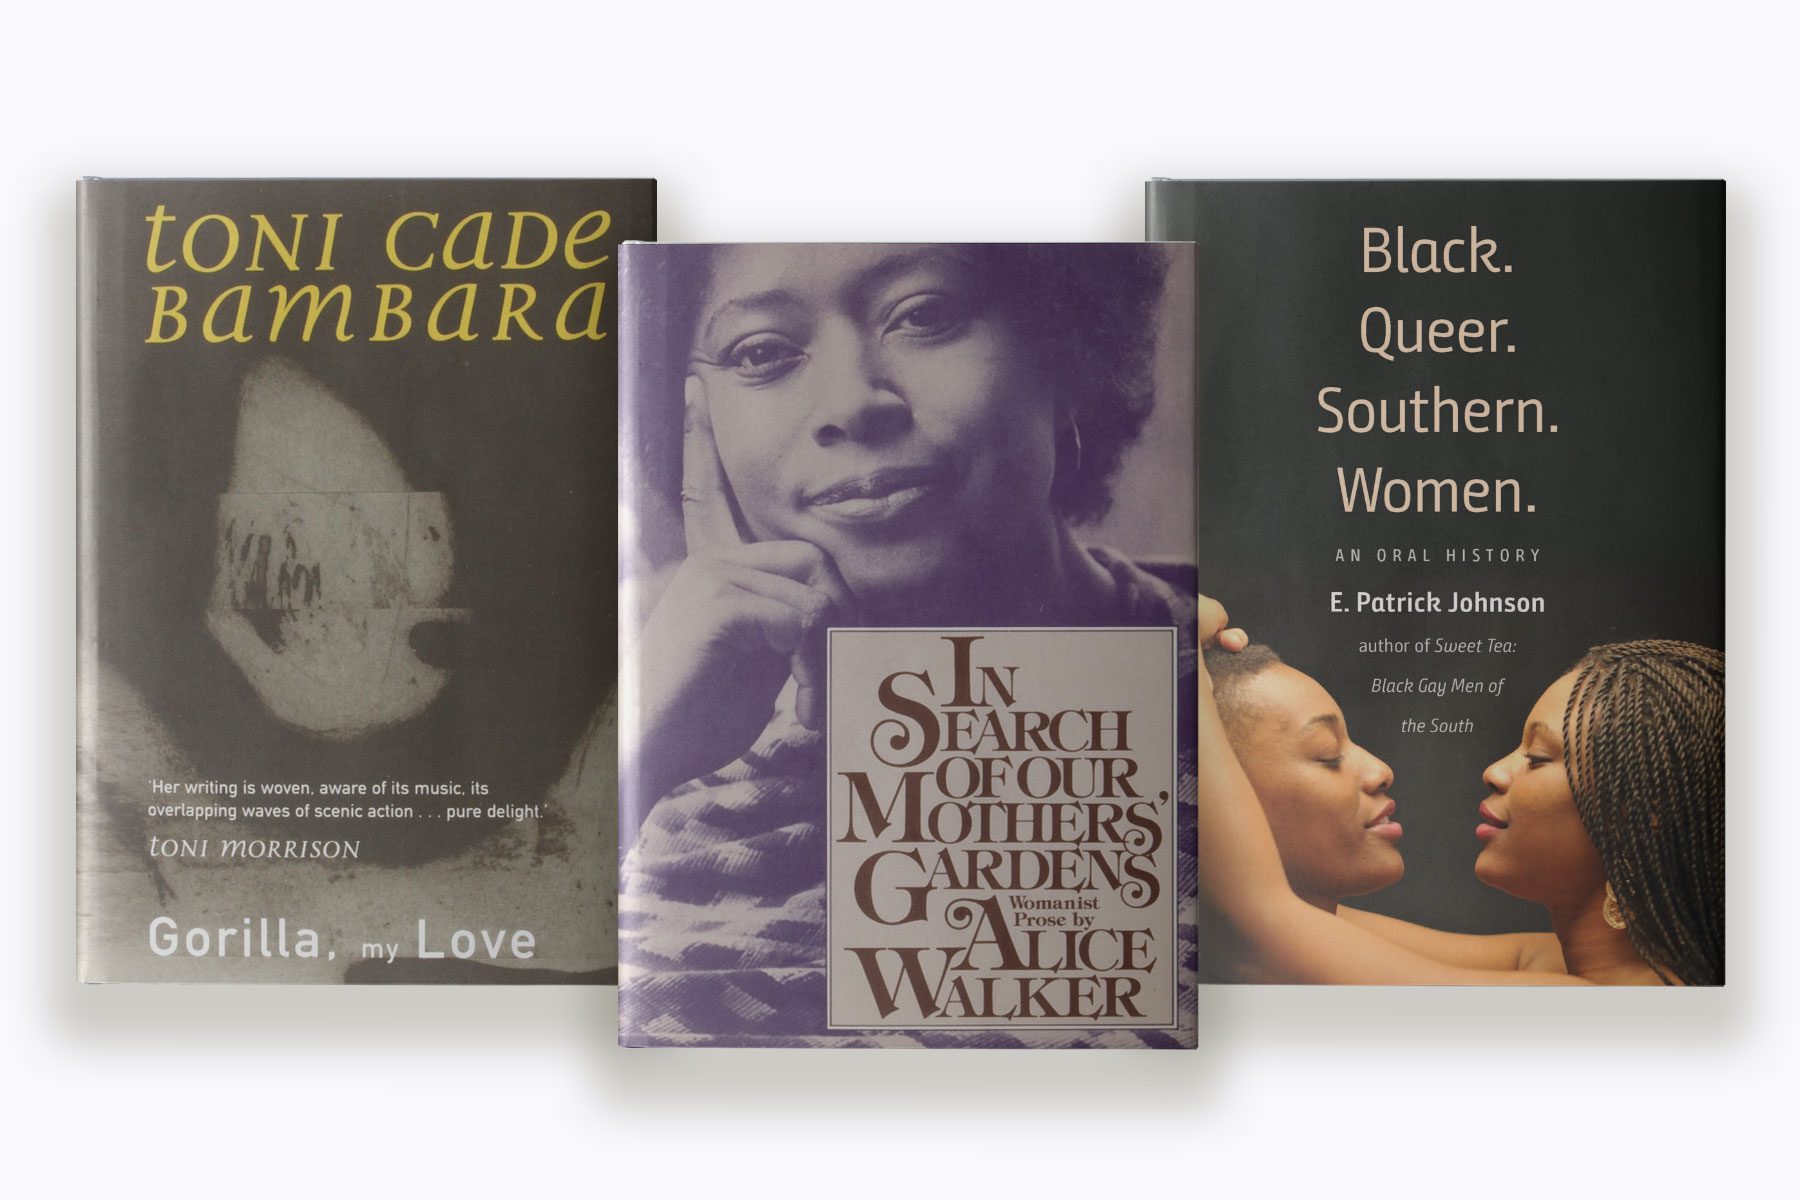 Three book covers: Toni Cade Bambara's "Gorilla, My Love," Alice Walker's "In Search of Our Mothers Gardens" and "Black. Queer. Southern. Women." by E. Patrick Johnson